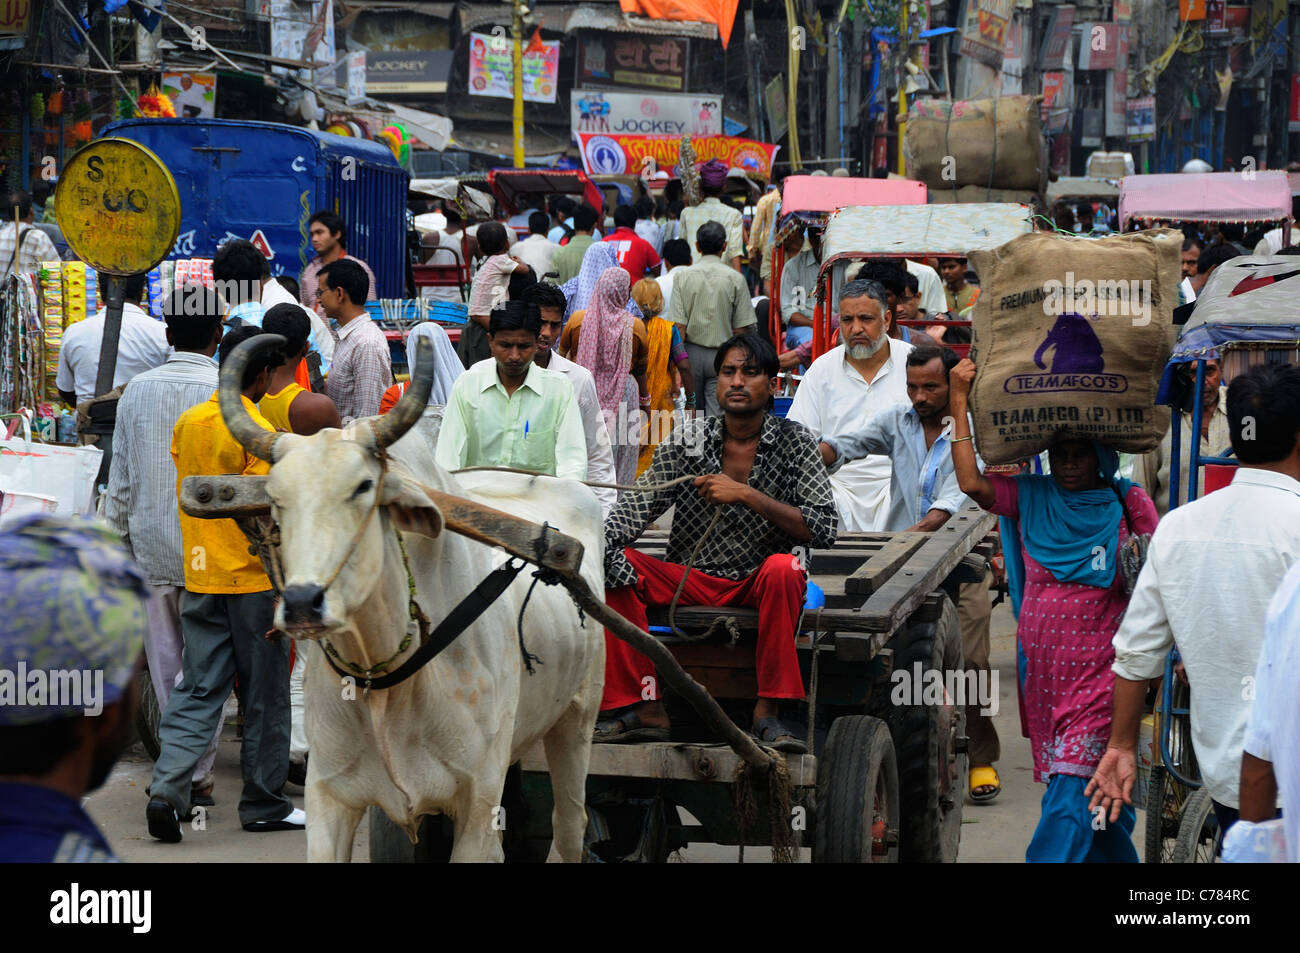 There are many cows pulling wheel working with human on the street at Sadha market at Chandni Chowk in Old Delhi. Stock Photo